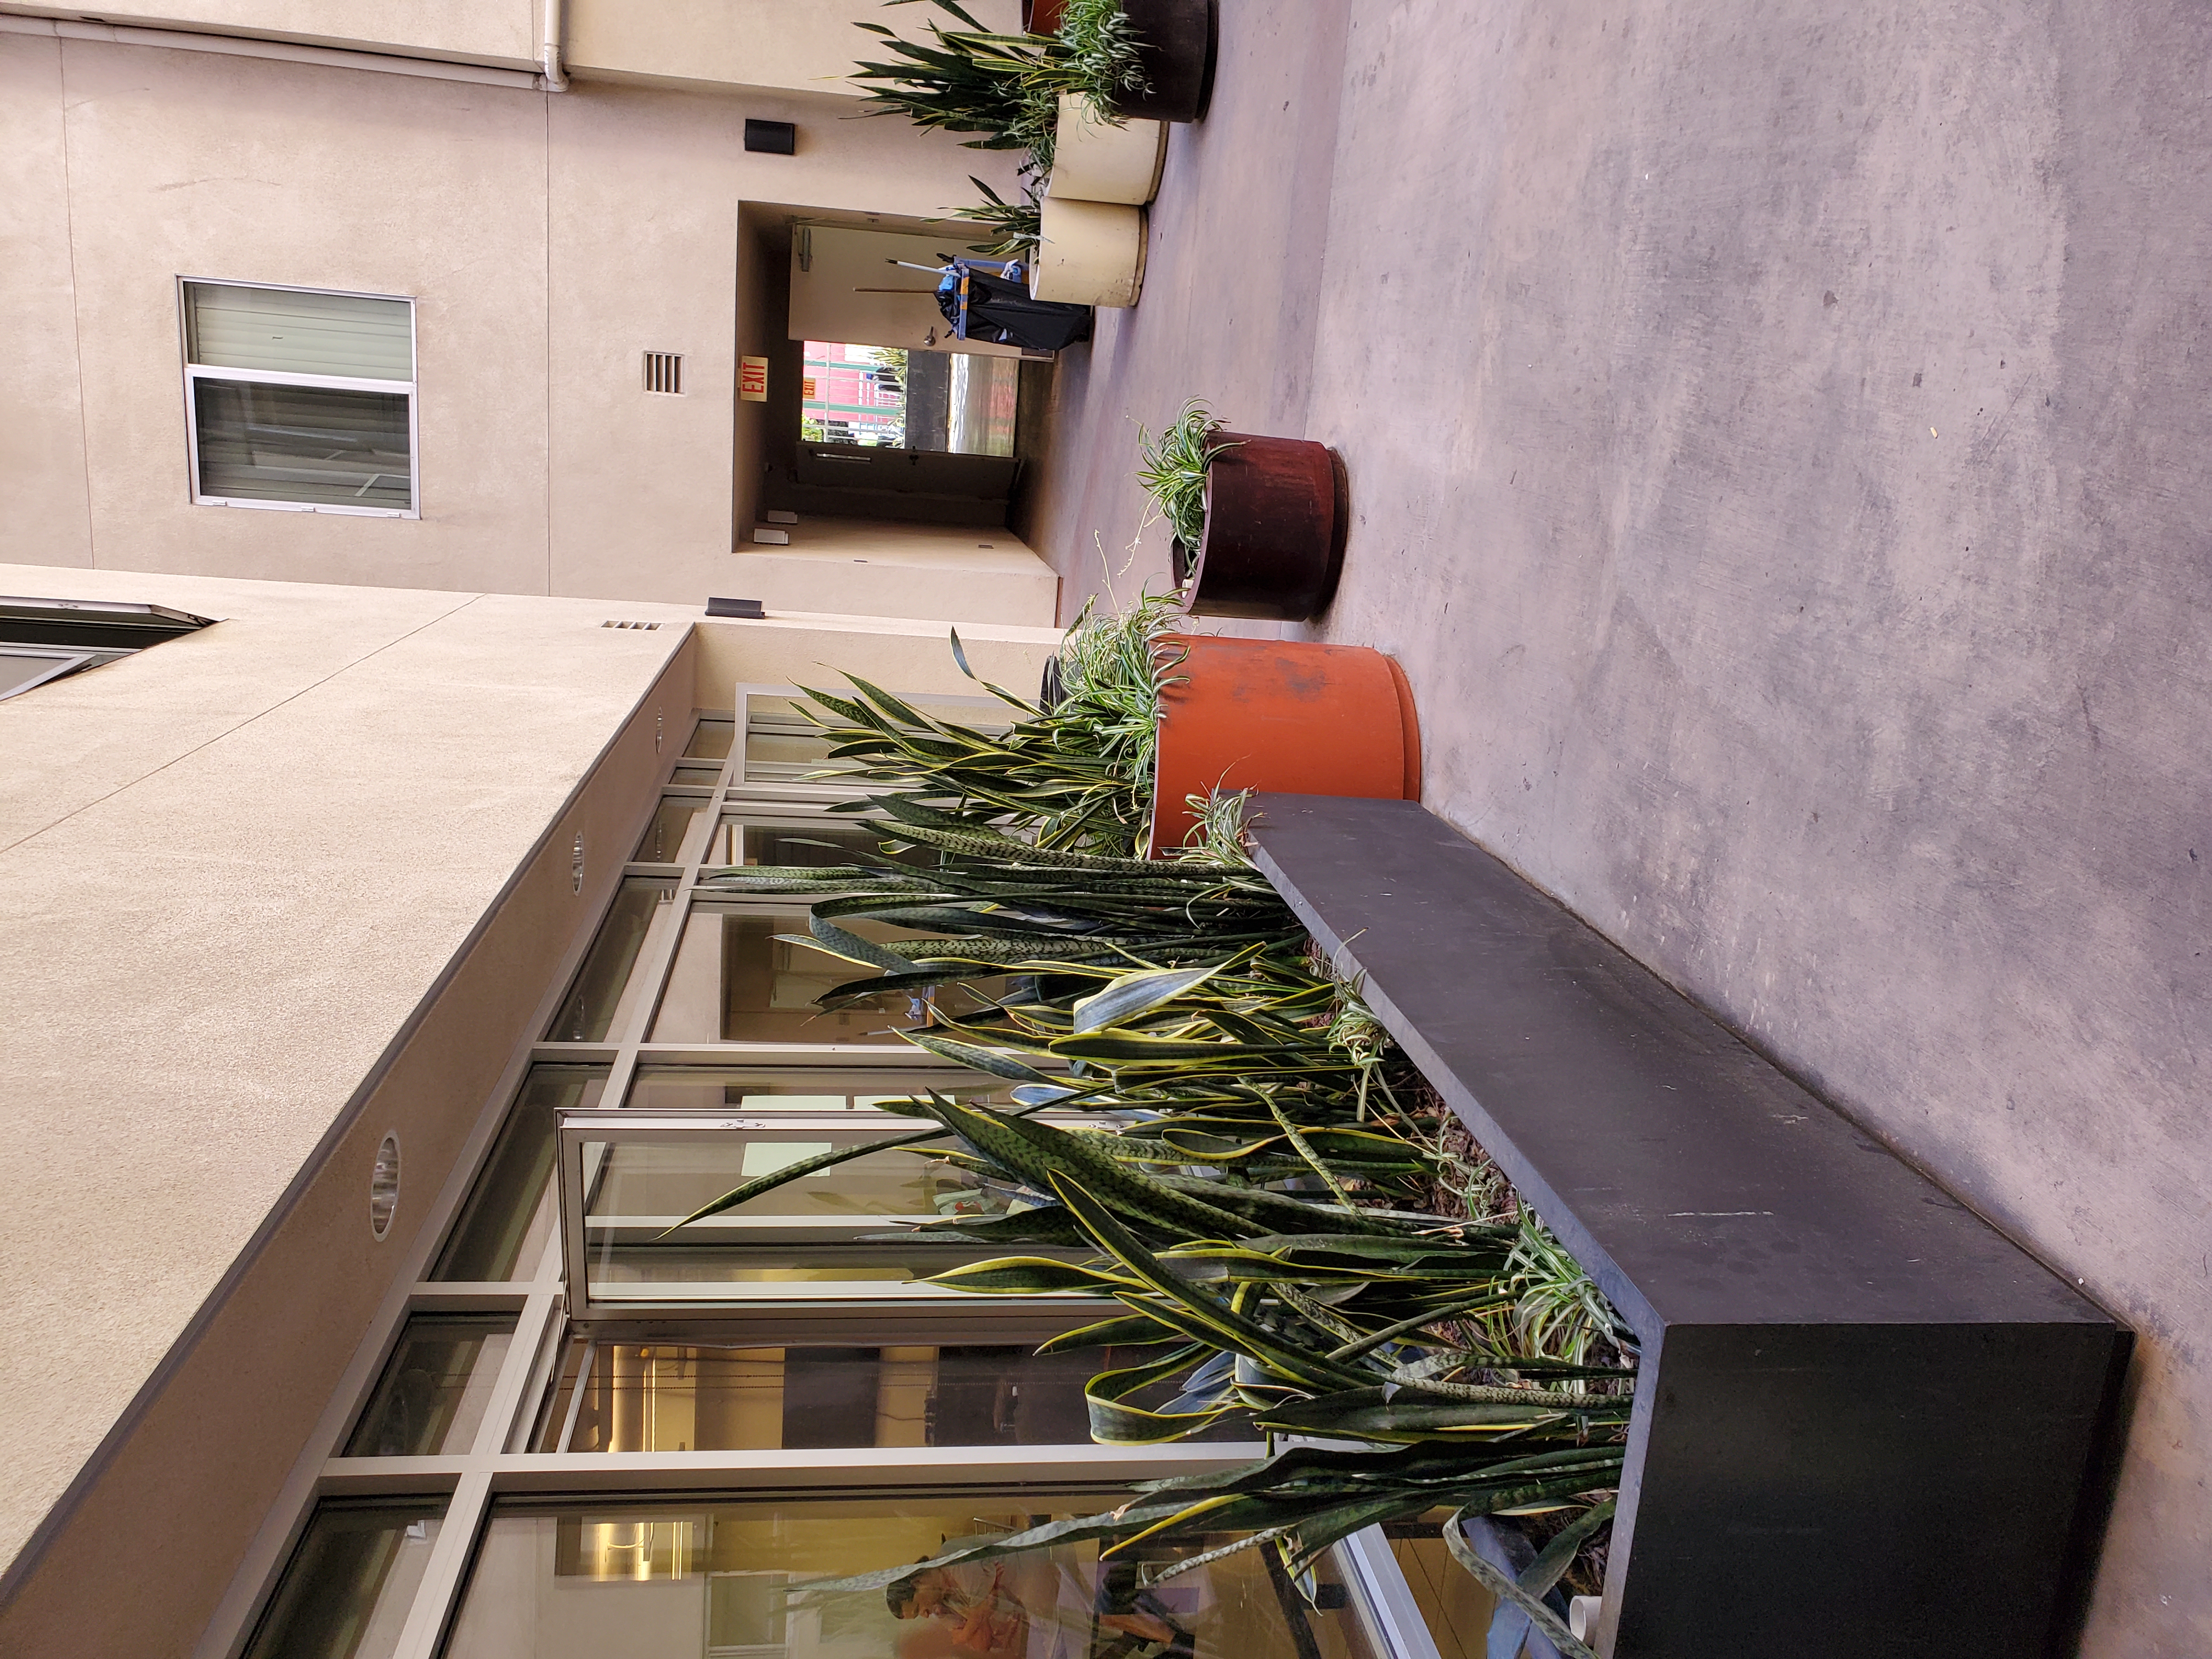 Photo of a portion of a courtyard with plants, access to the street and glass windows.